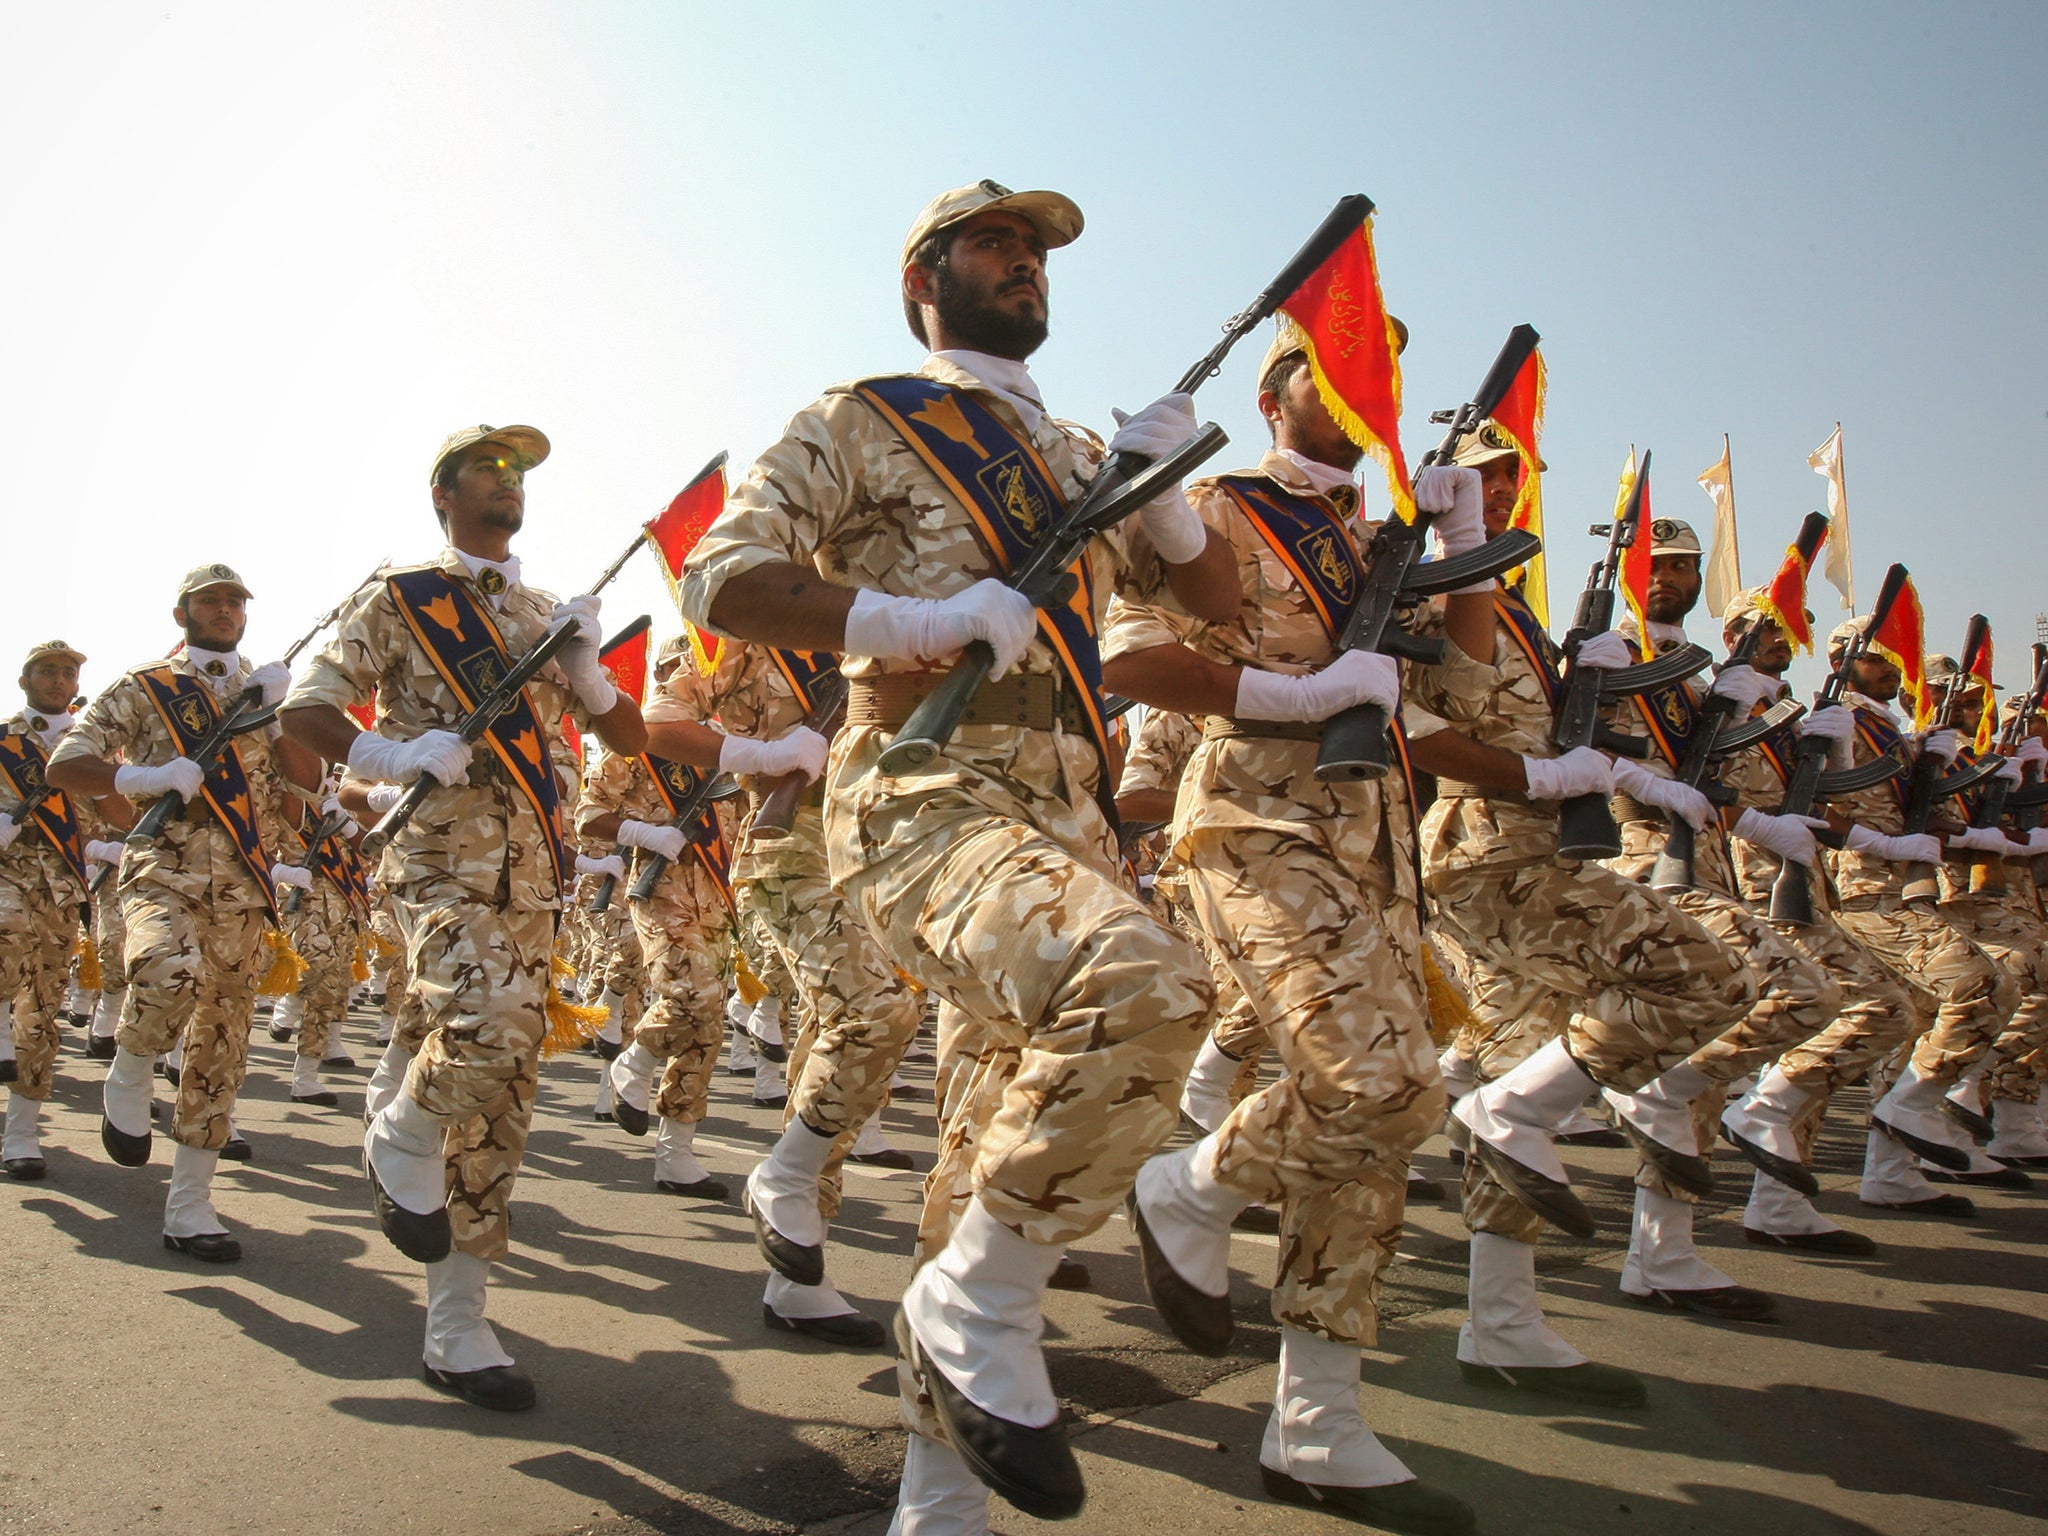 Members of the Iranian Revolutionary Guard march